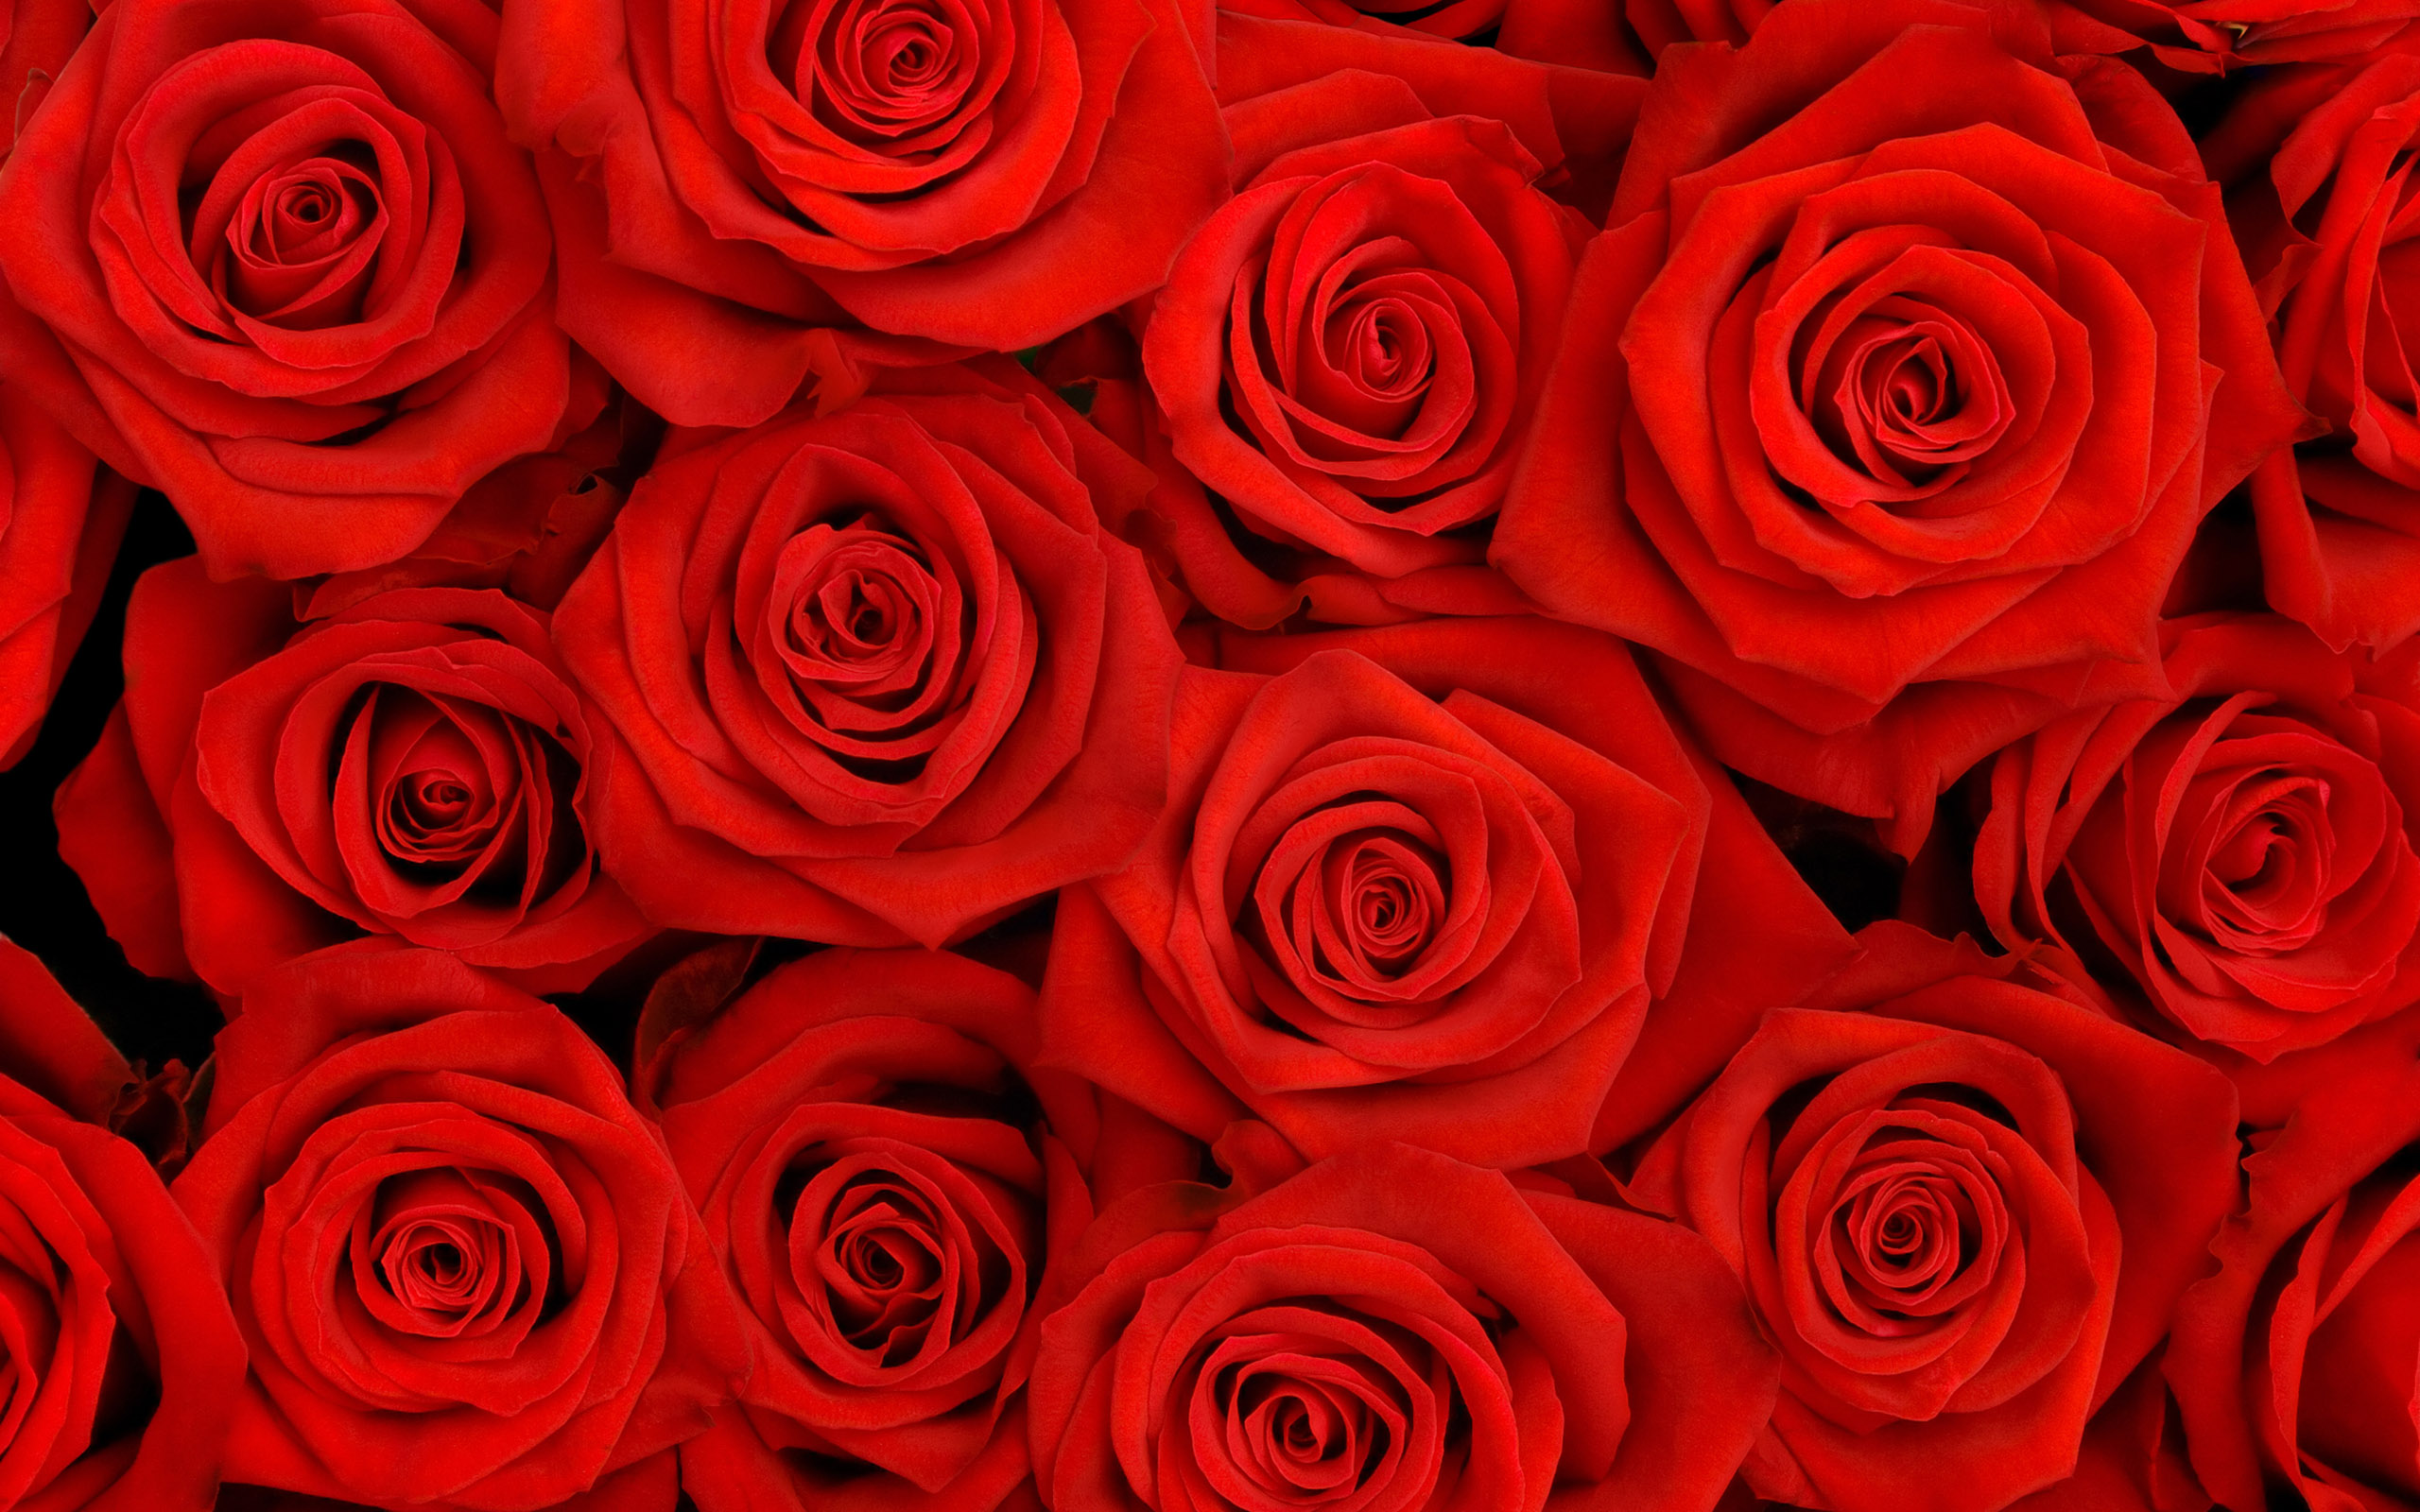 Lovely Roses HQ Wallpapers HD Wallpapers